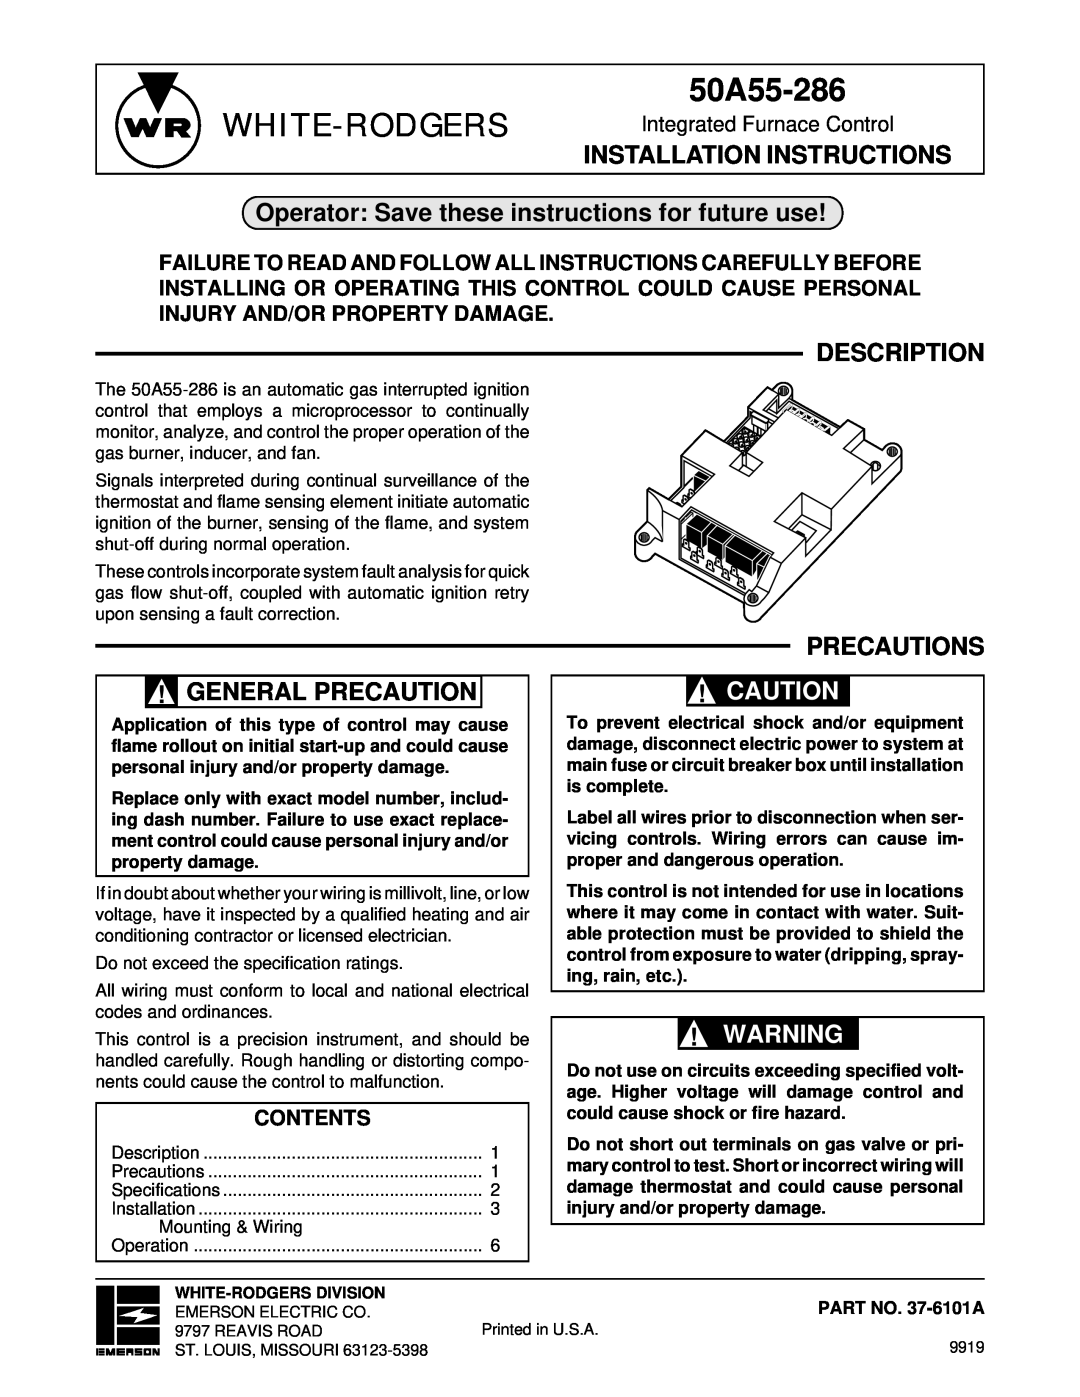 White Rodgers 50a55-286 installation instructions Operator Save these instructions for future use, Description, Contents 